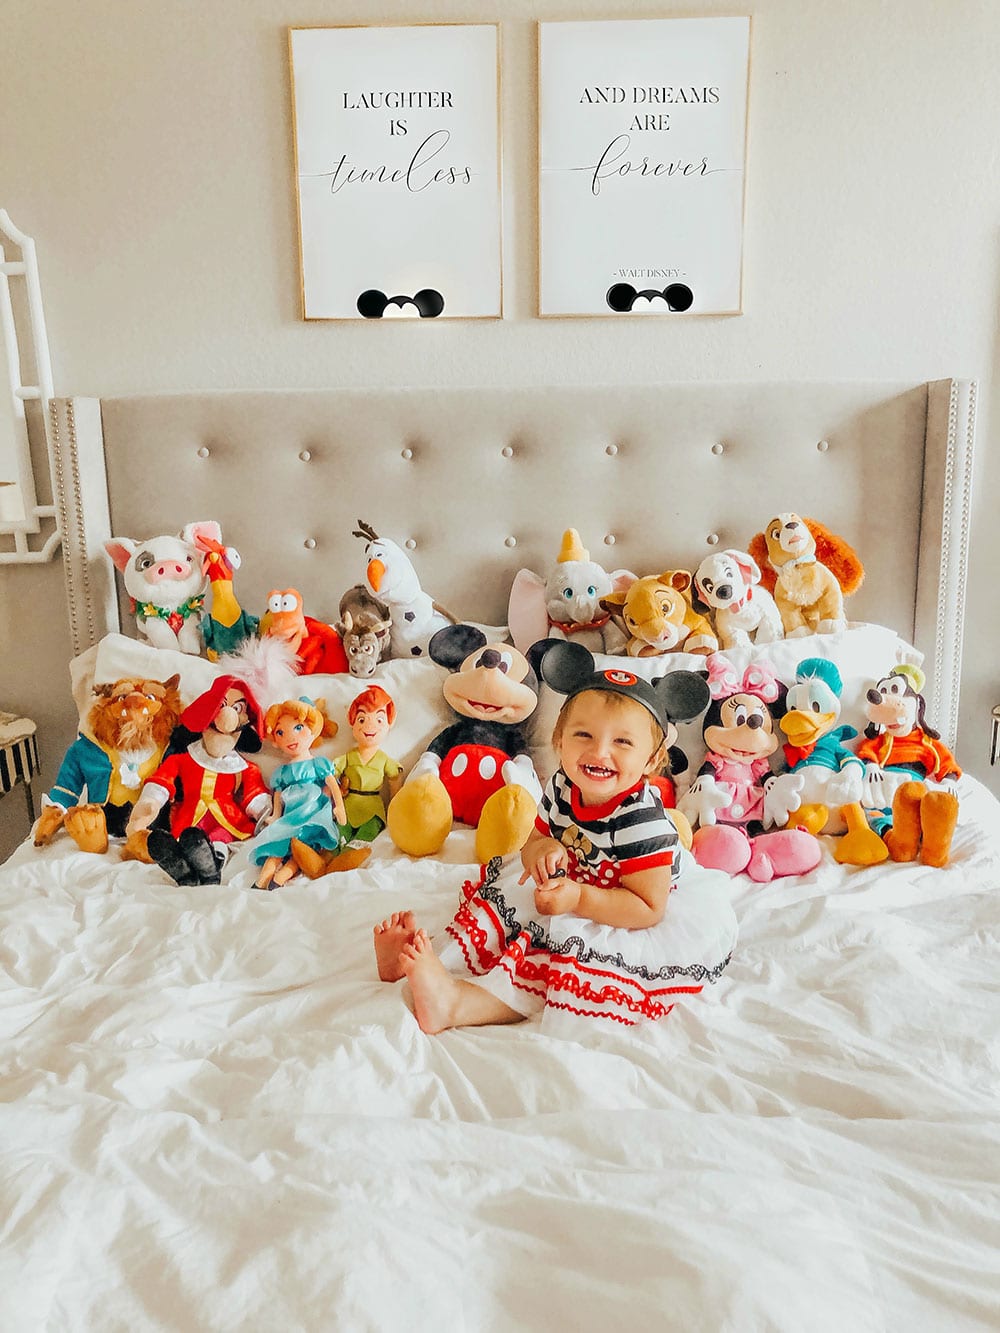 toddler activities to do at home - indoor activity - play pretend with Disney plush toys